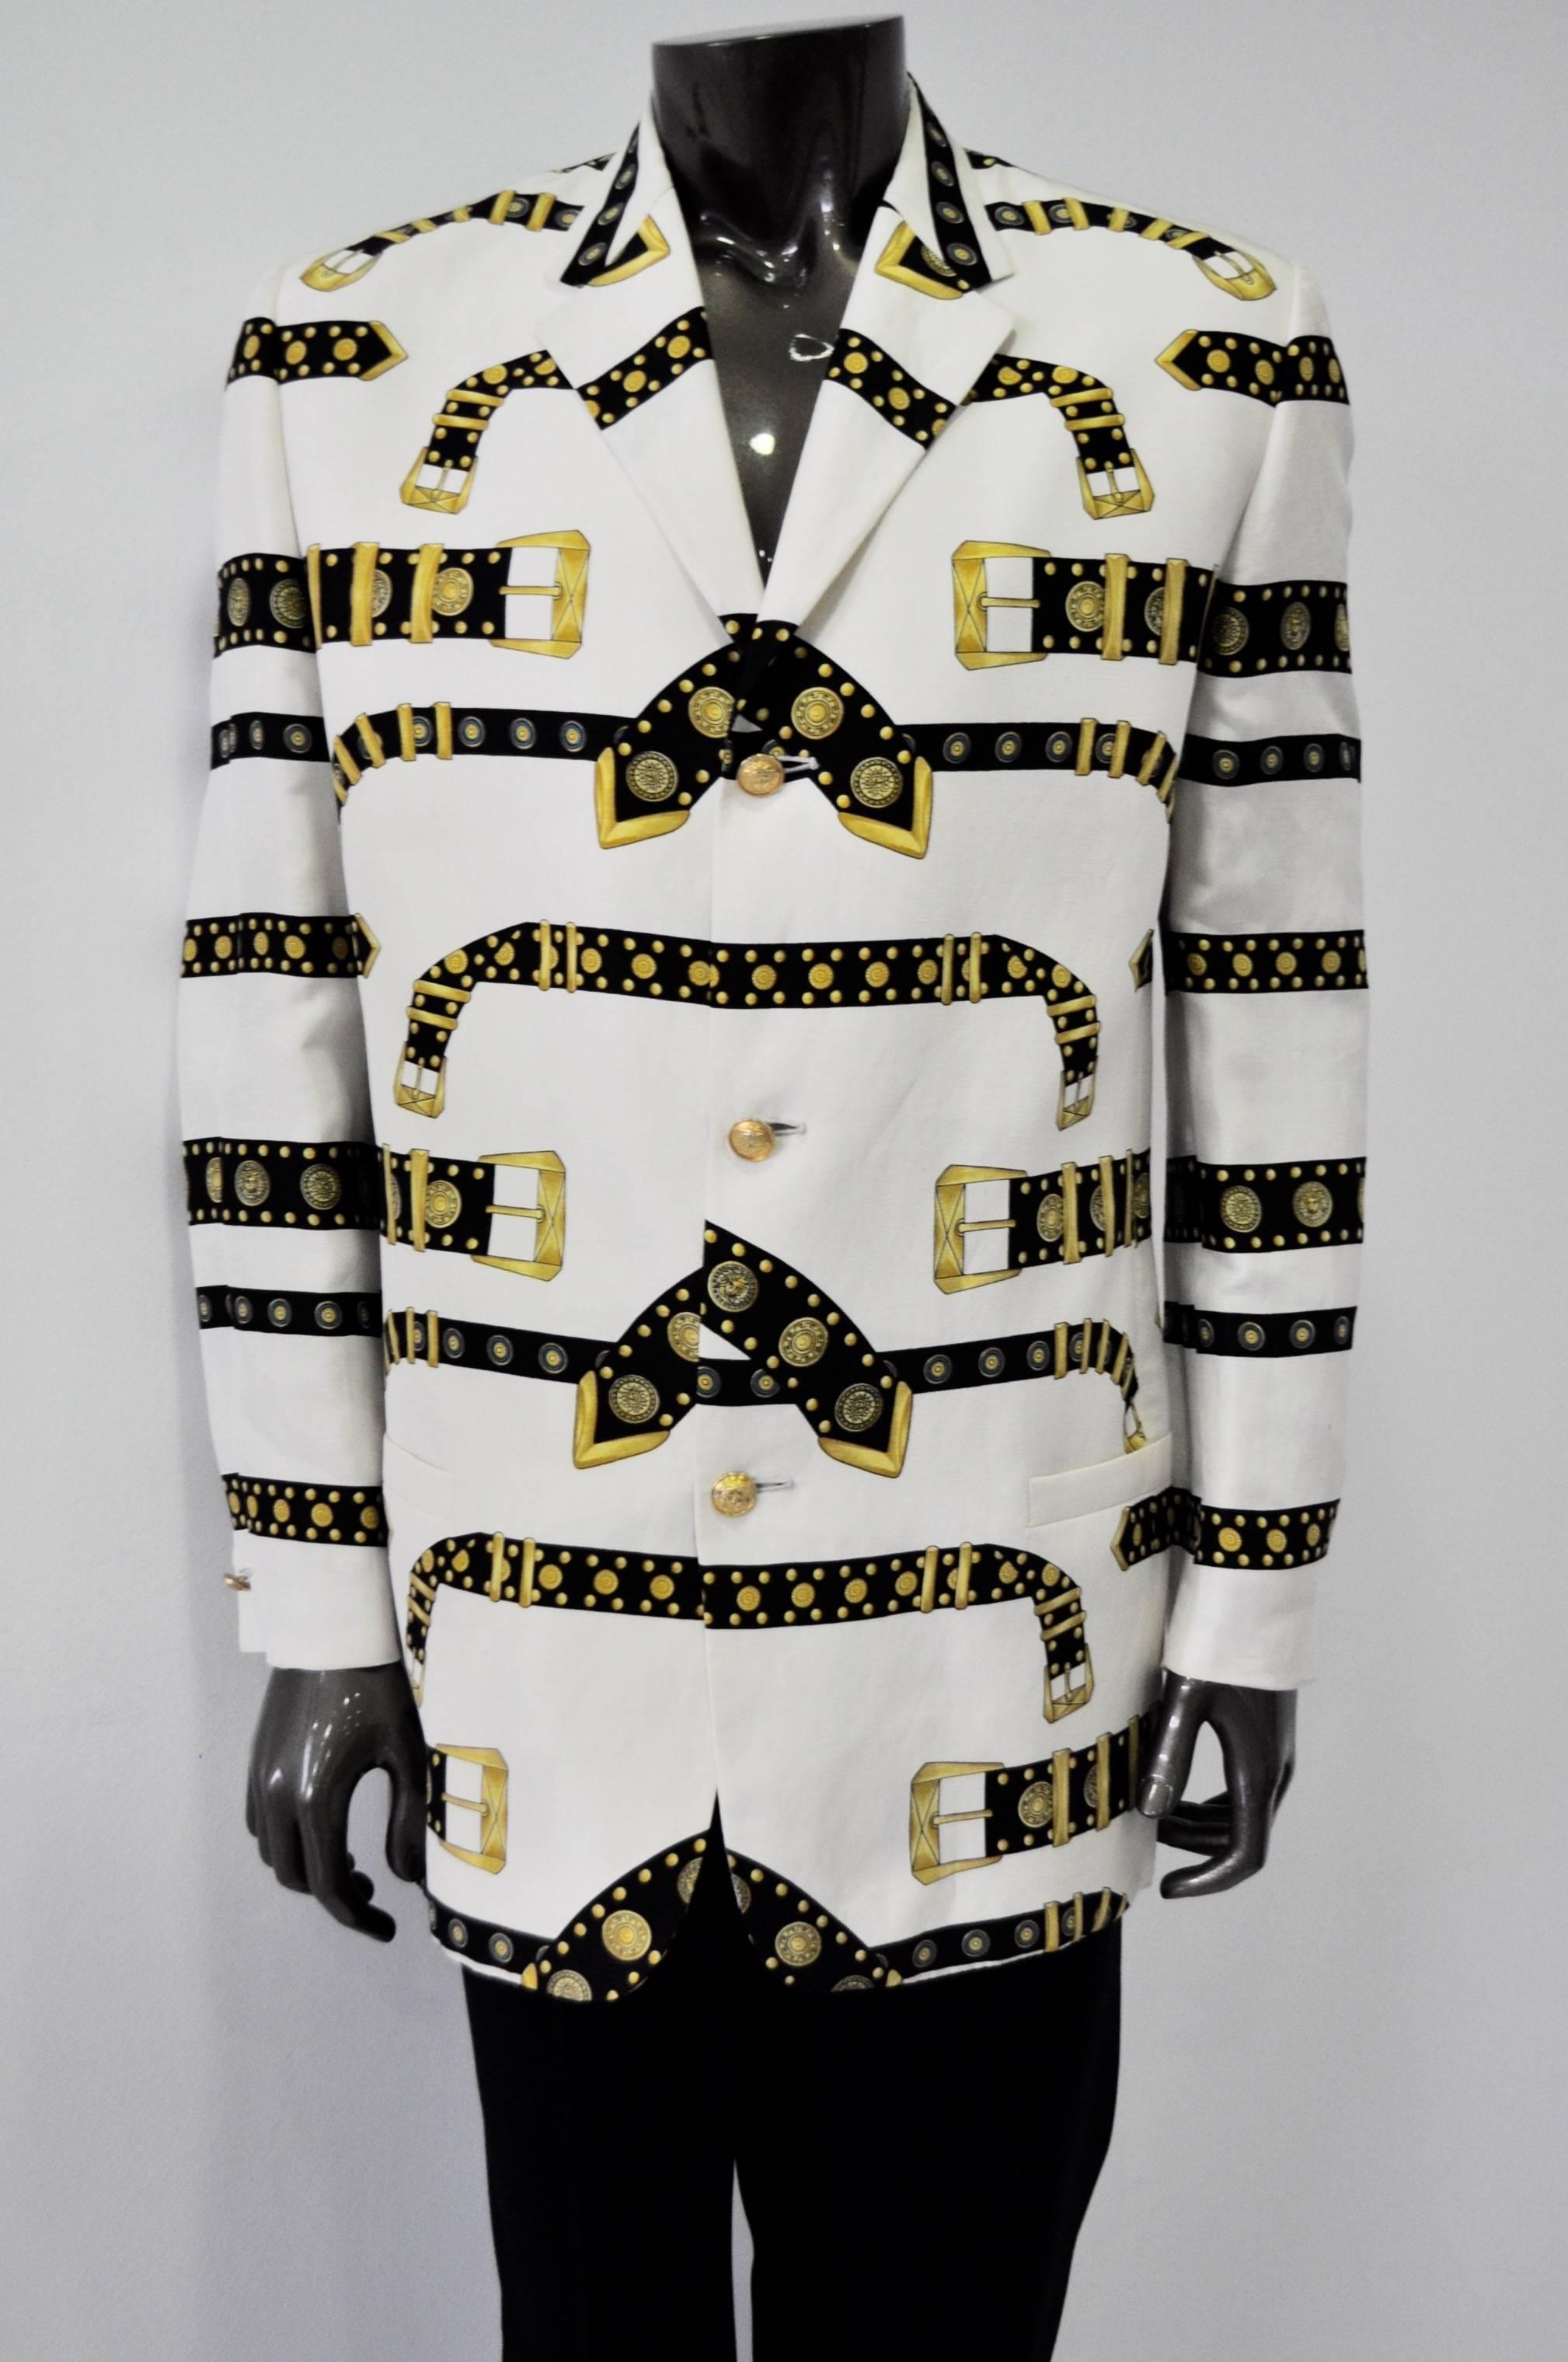 Iconic and Rare Gianni Versace Studded Belt Print Mens Linen Jacket, Sensational Spring 1993 Collection